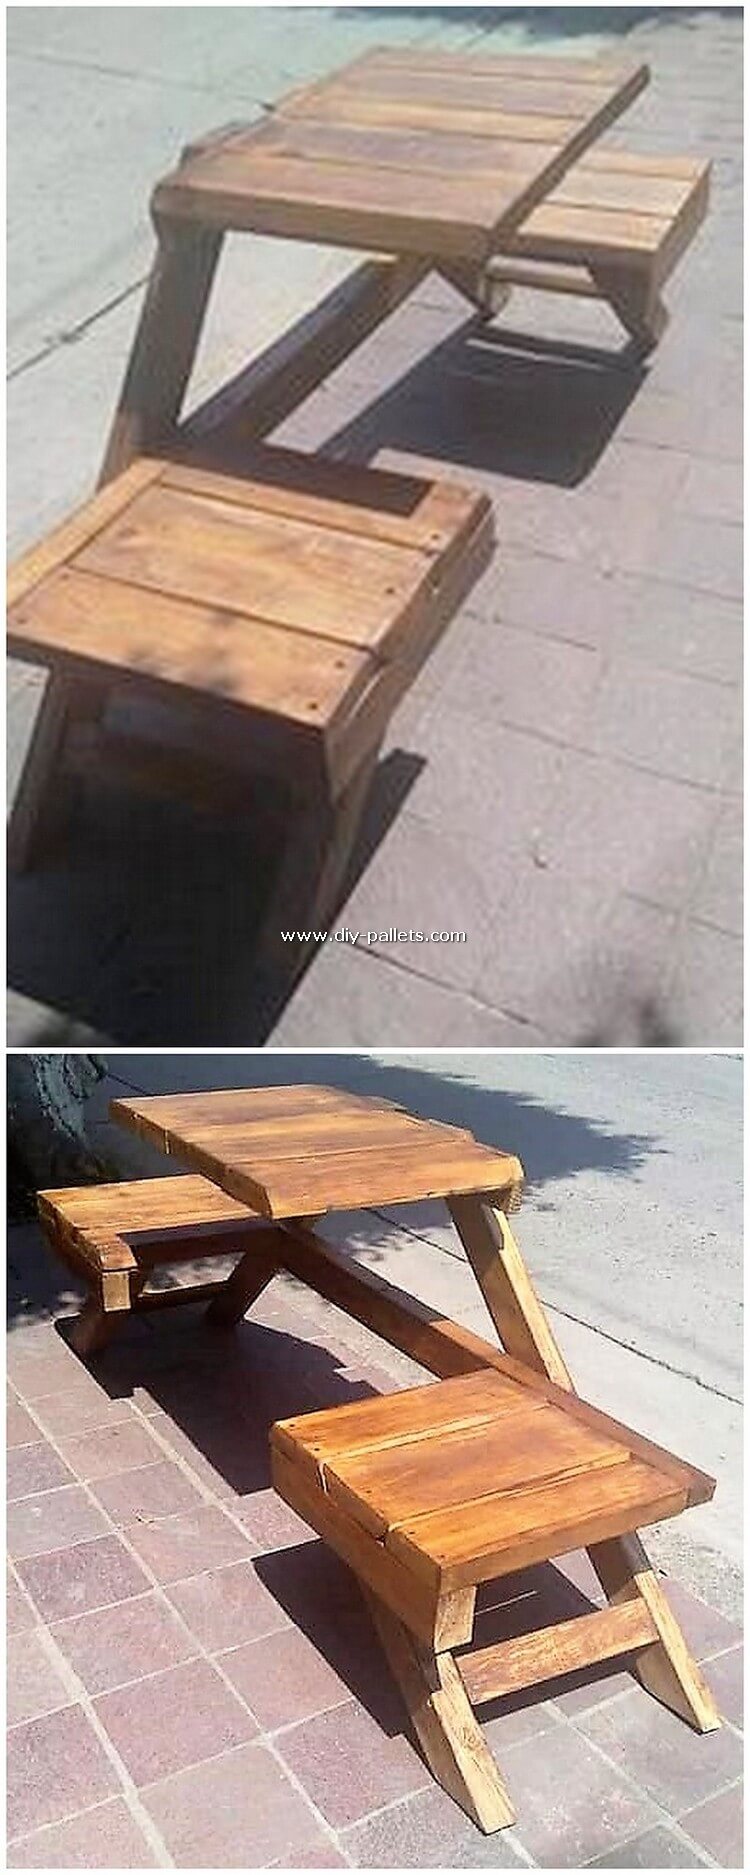 Pallet Table with Stools